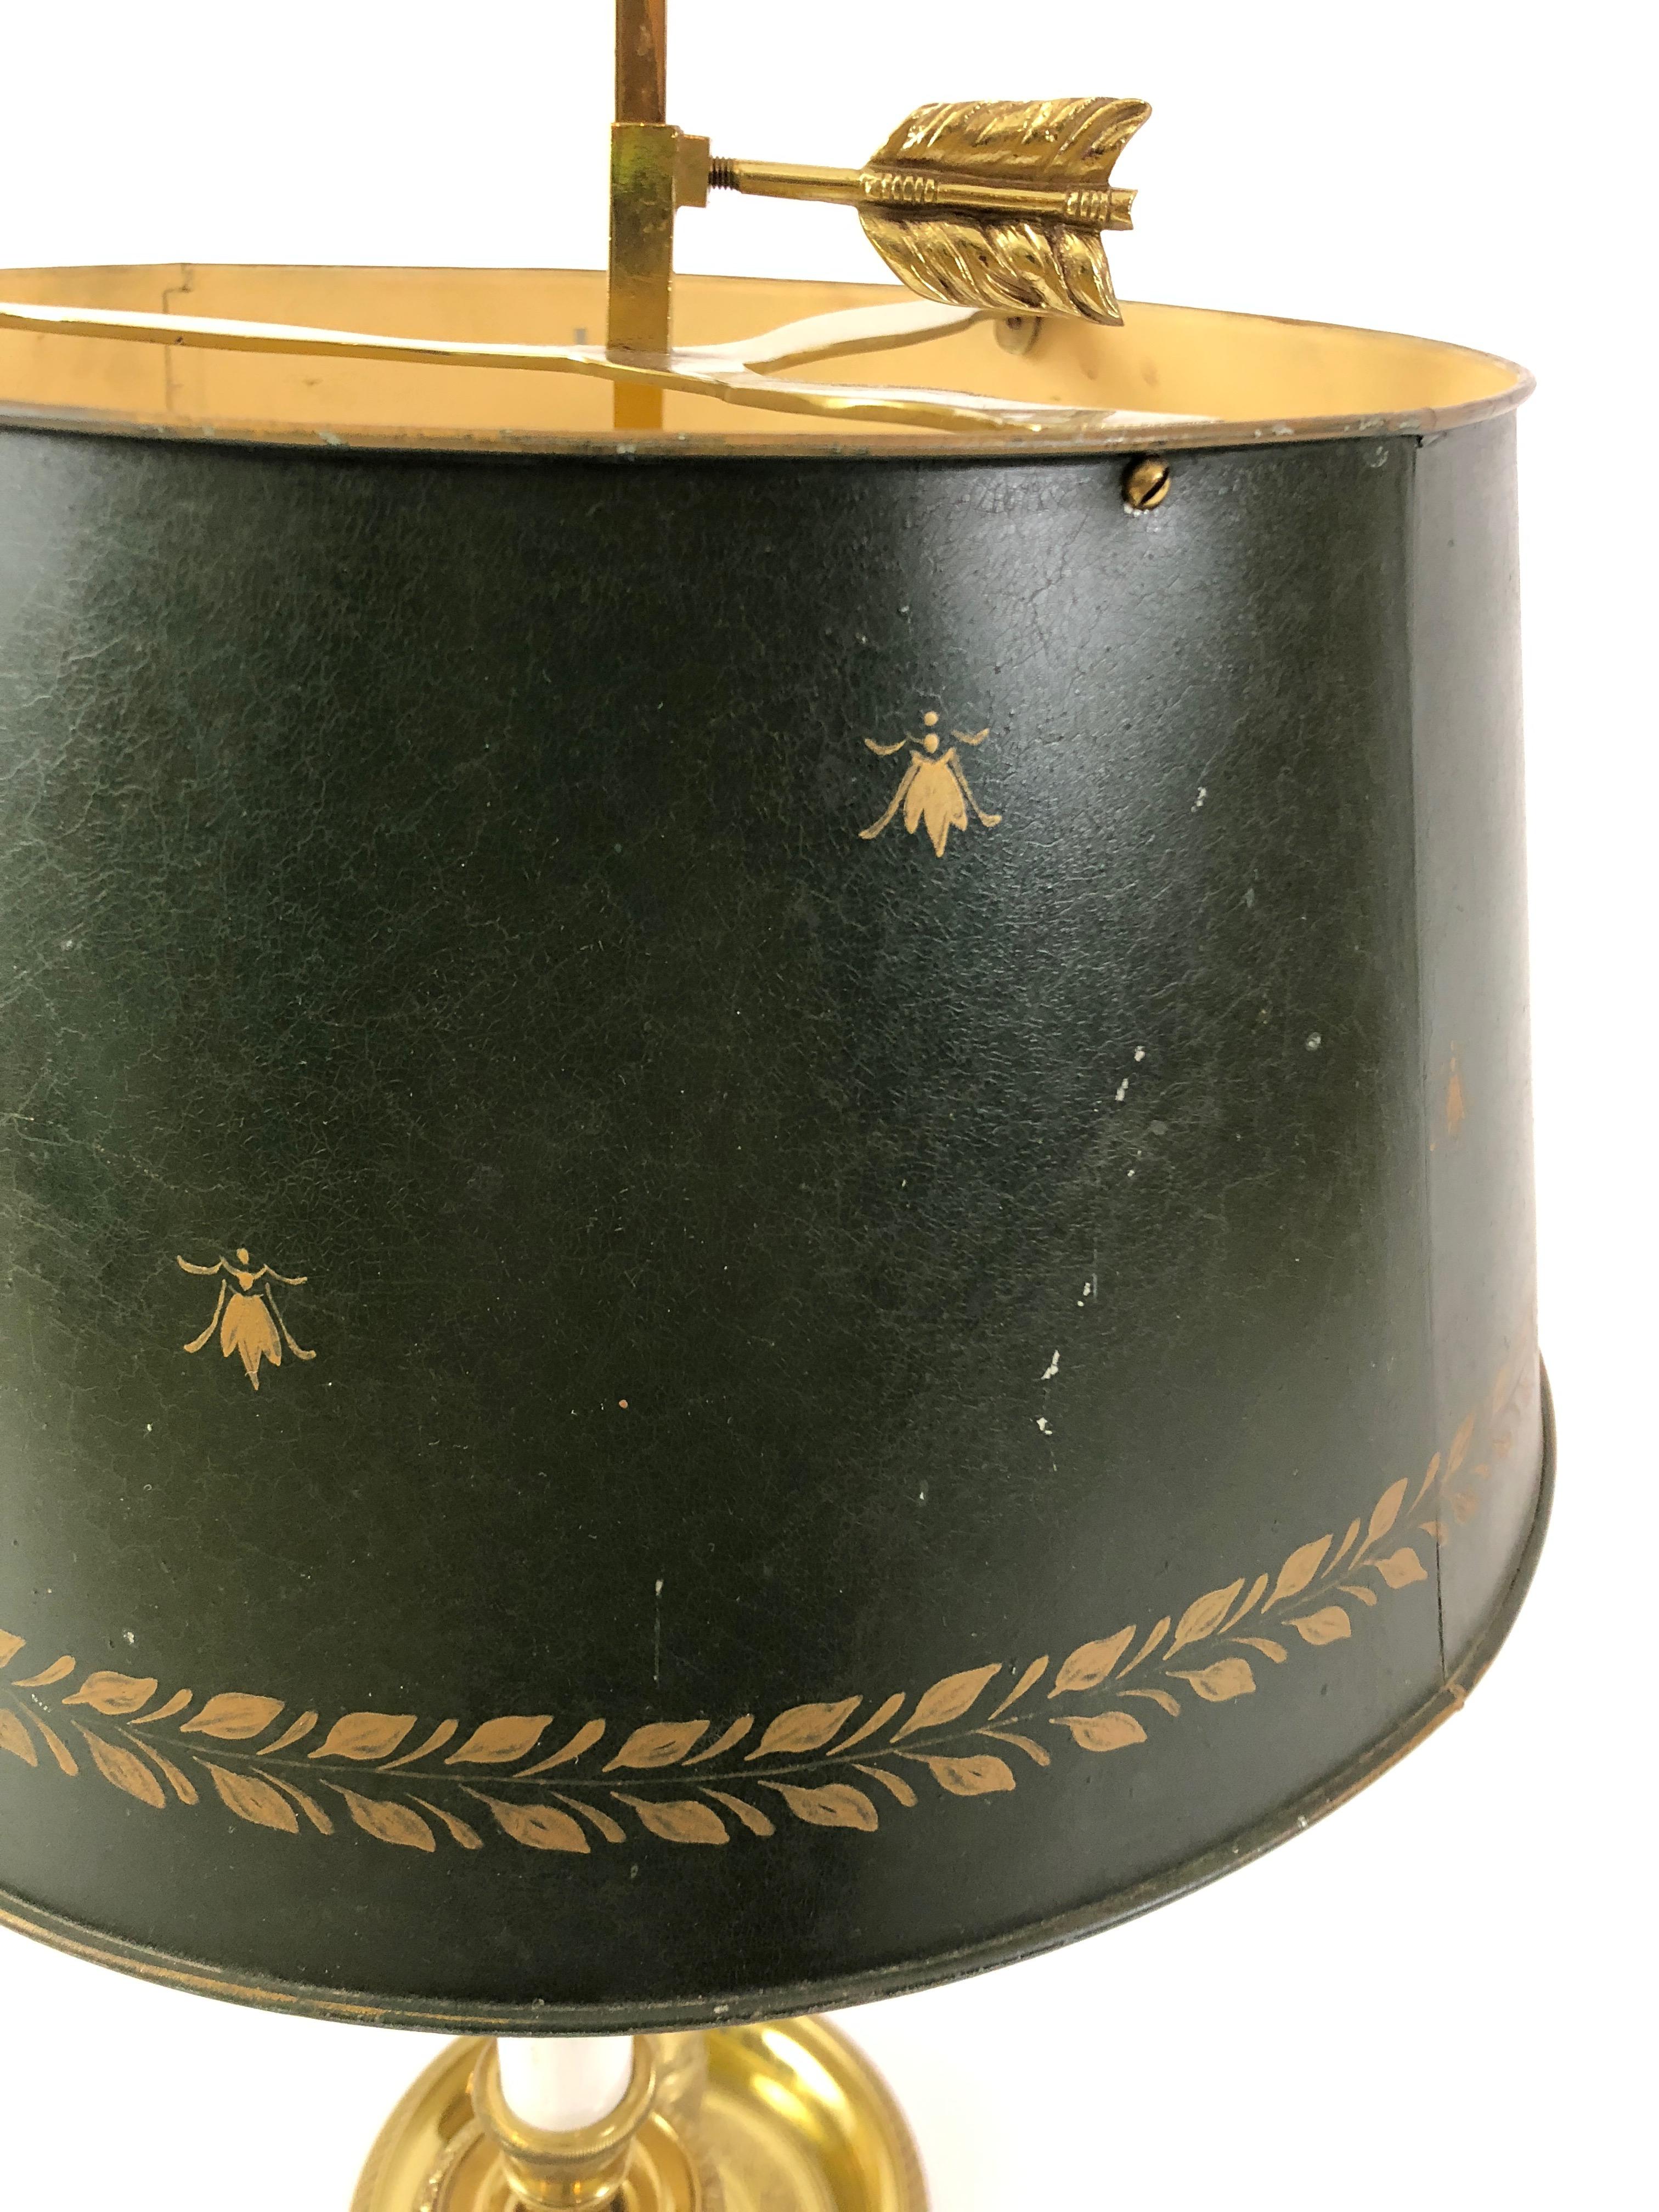 Classic French brass bouillotte lamp having 3 curvy candlestick arms, arrow finial, etched brass base and wonderful tin shade with decorative gold bees adorning it.